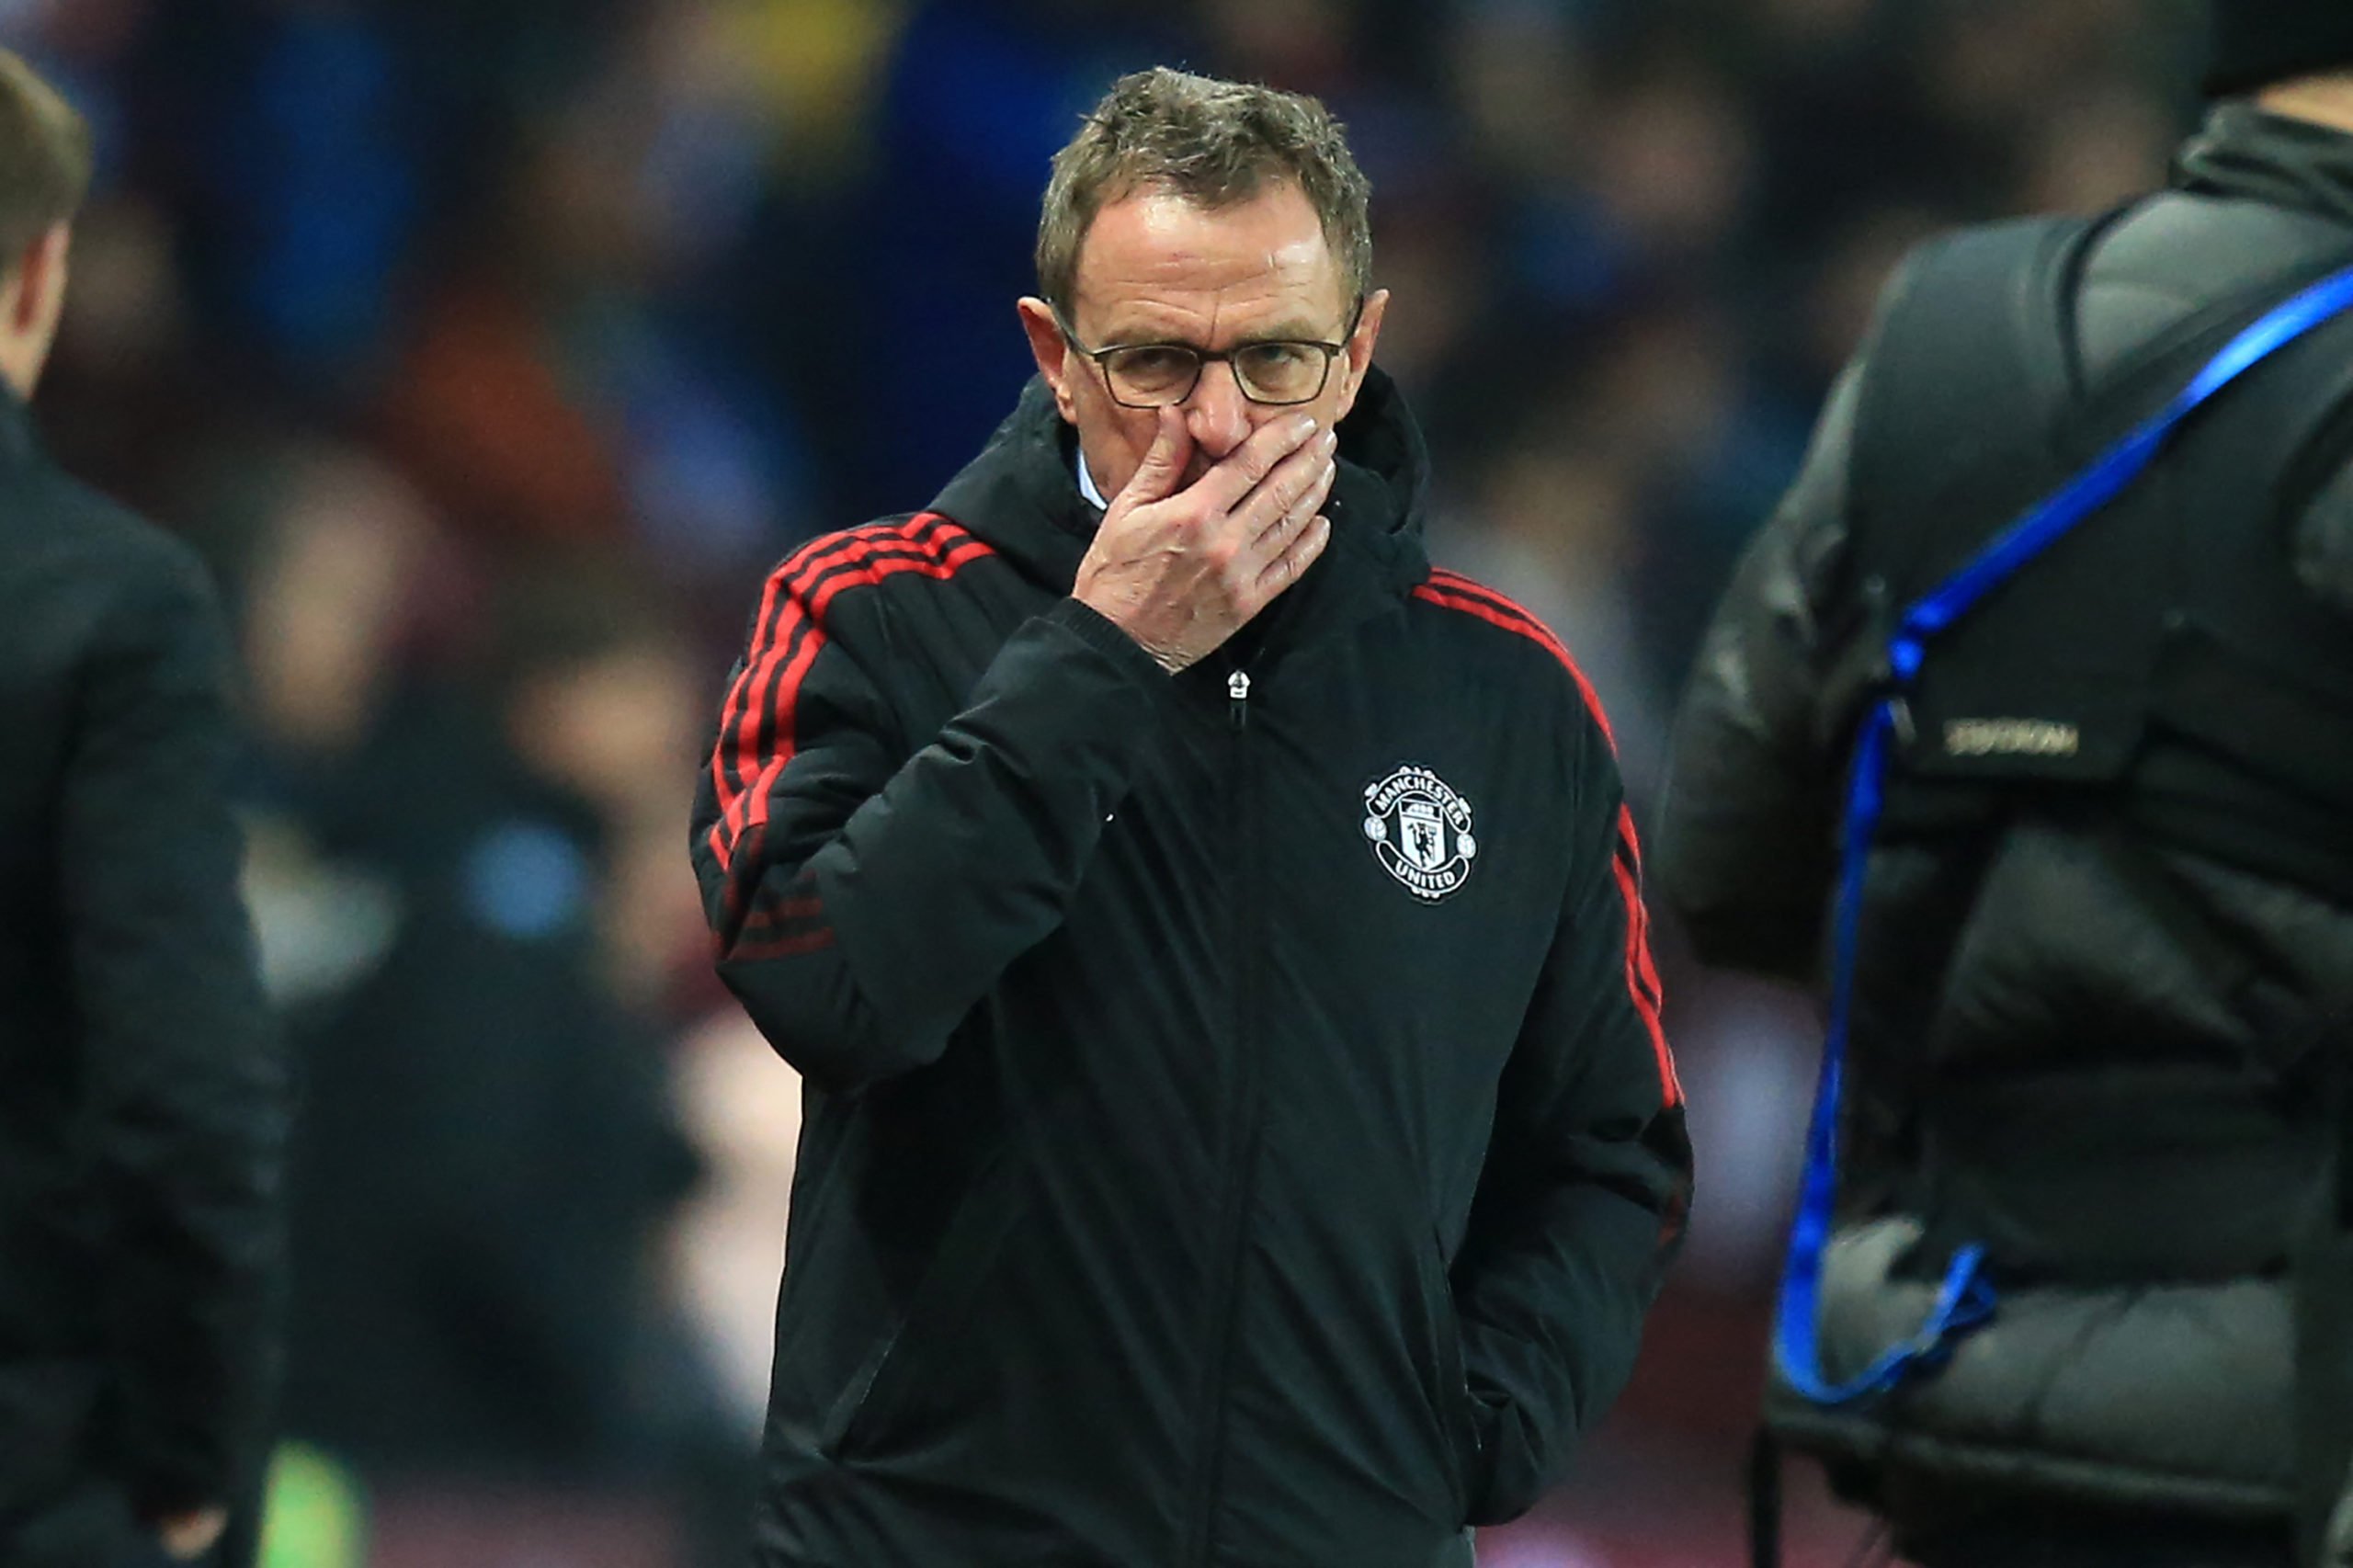 Manchester United fans unhappy with Ralf Rangnick's late substitutions